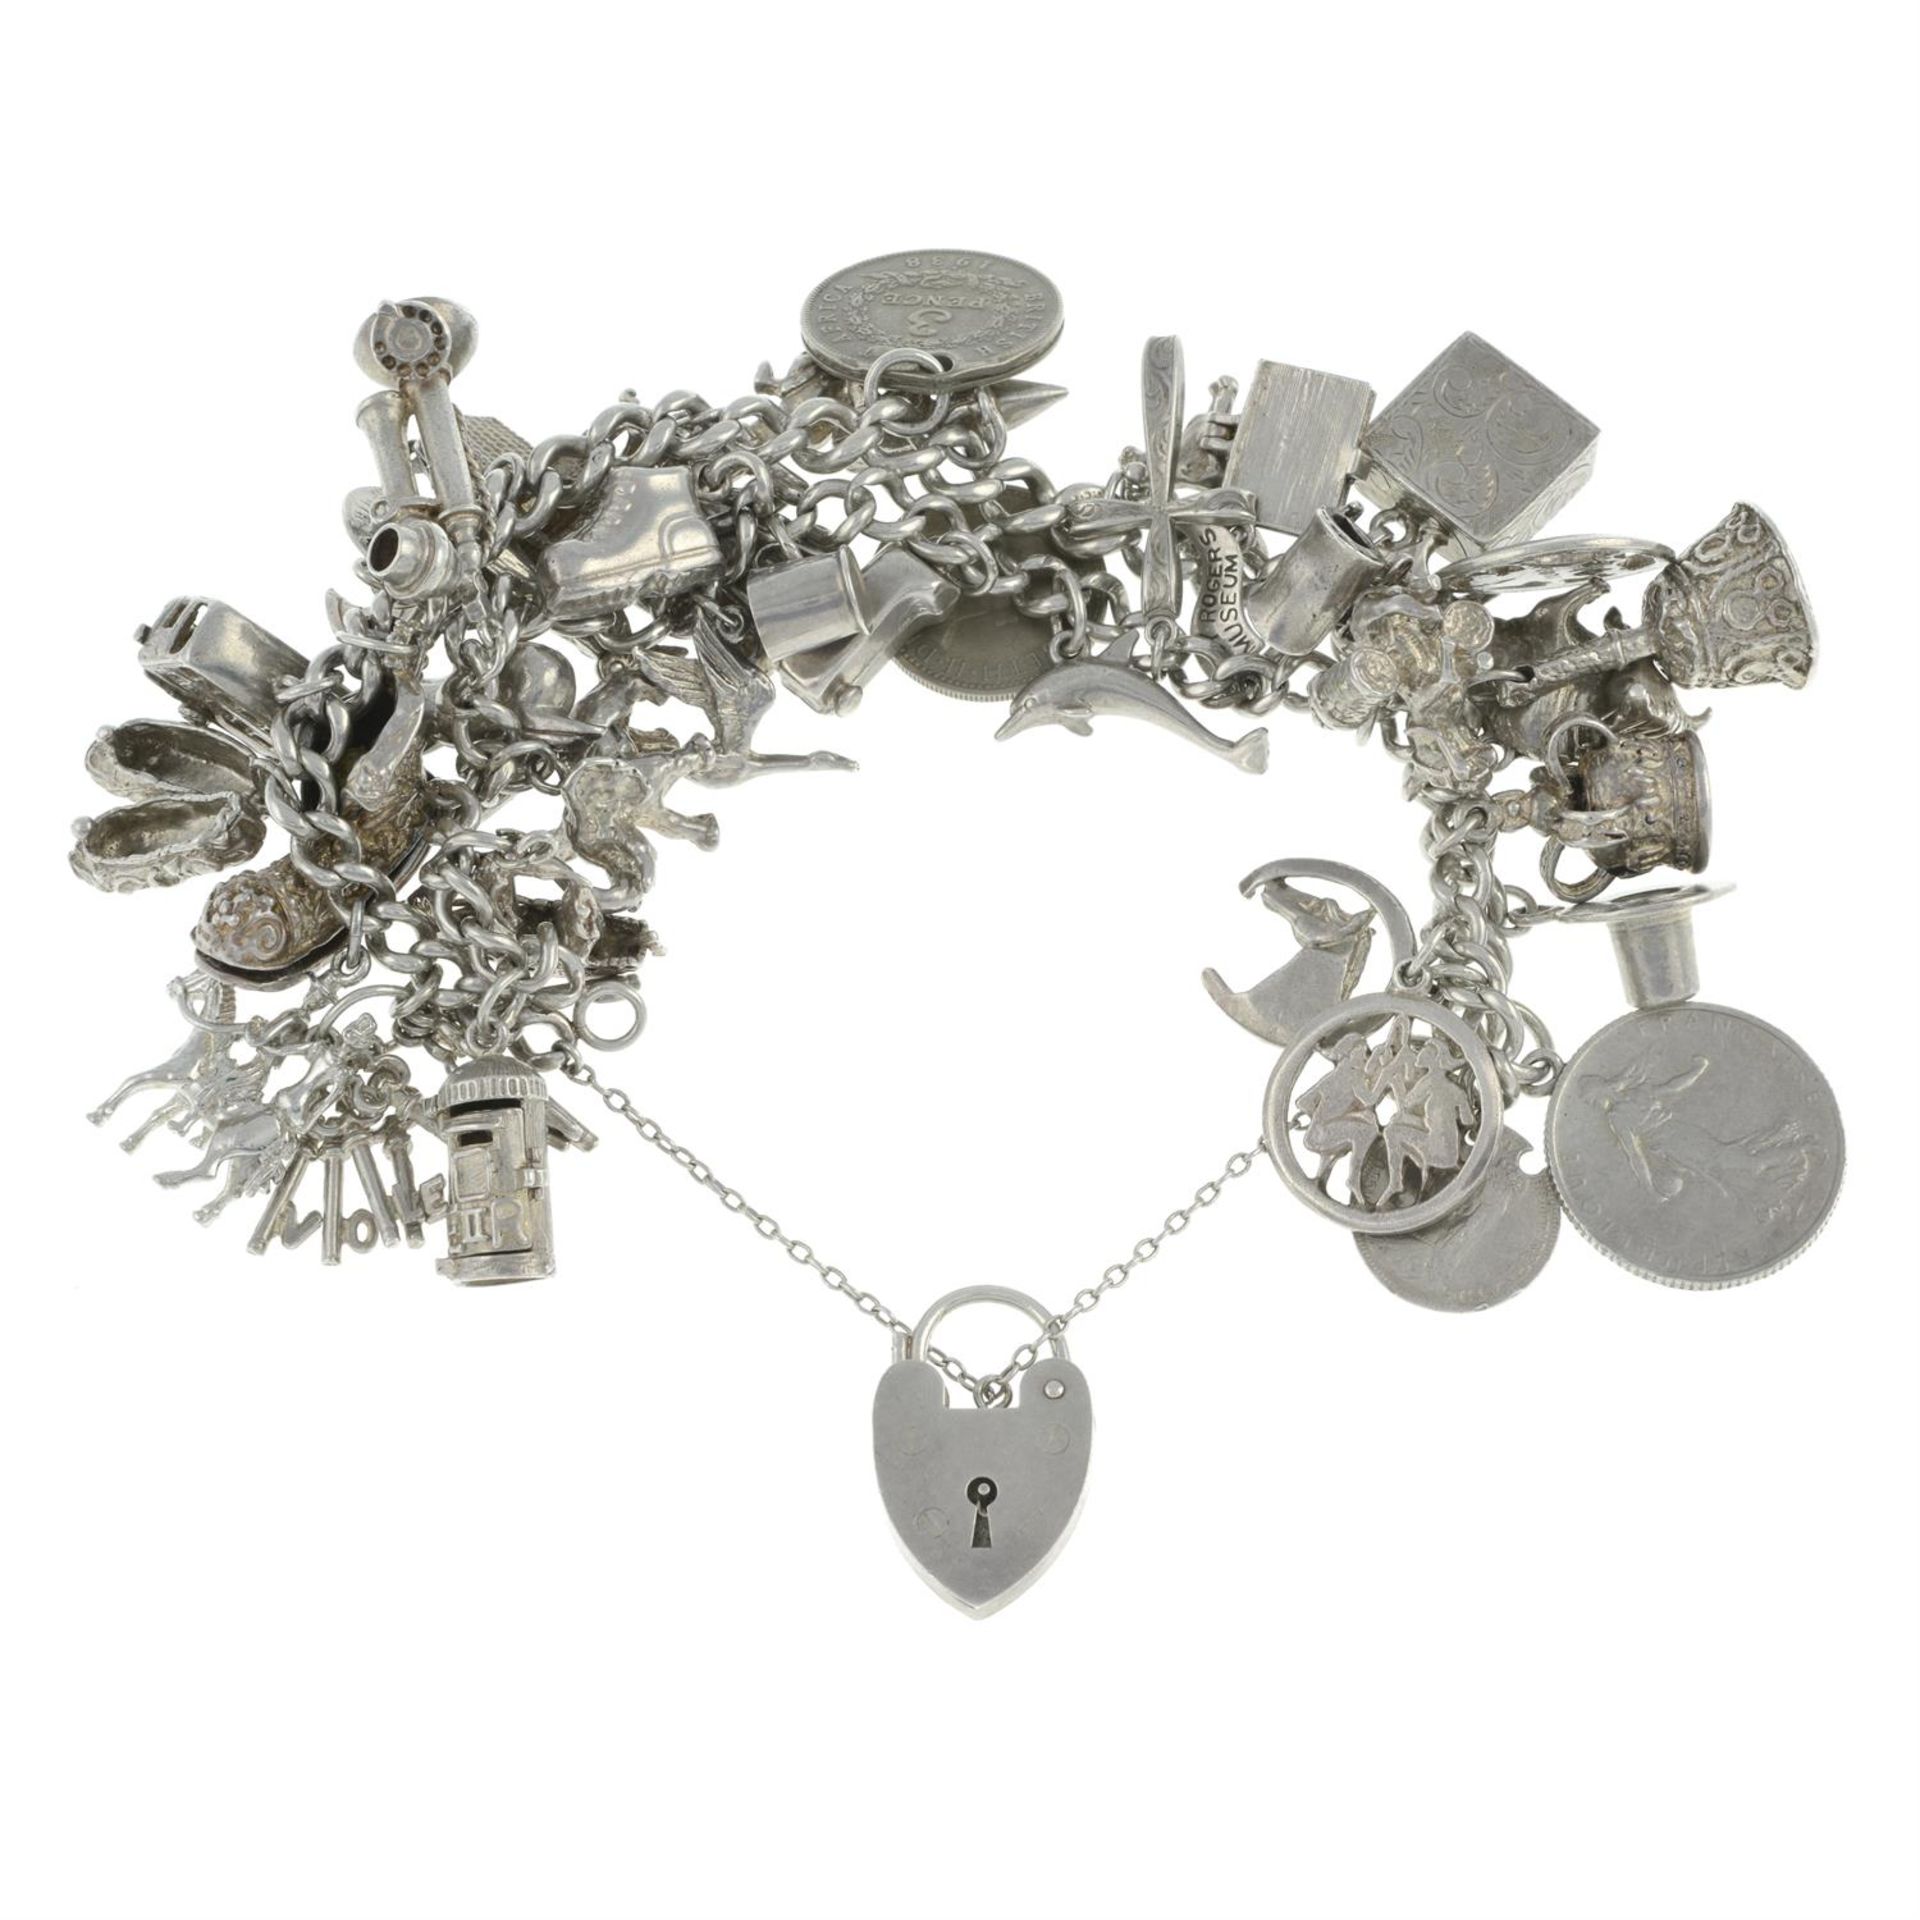 Charm bracelet, with charms